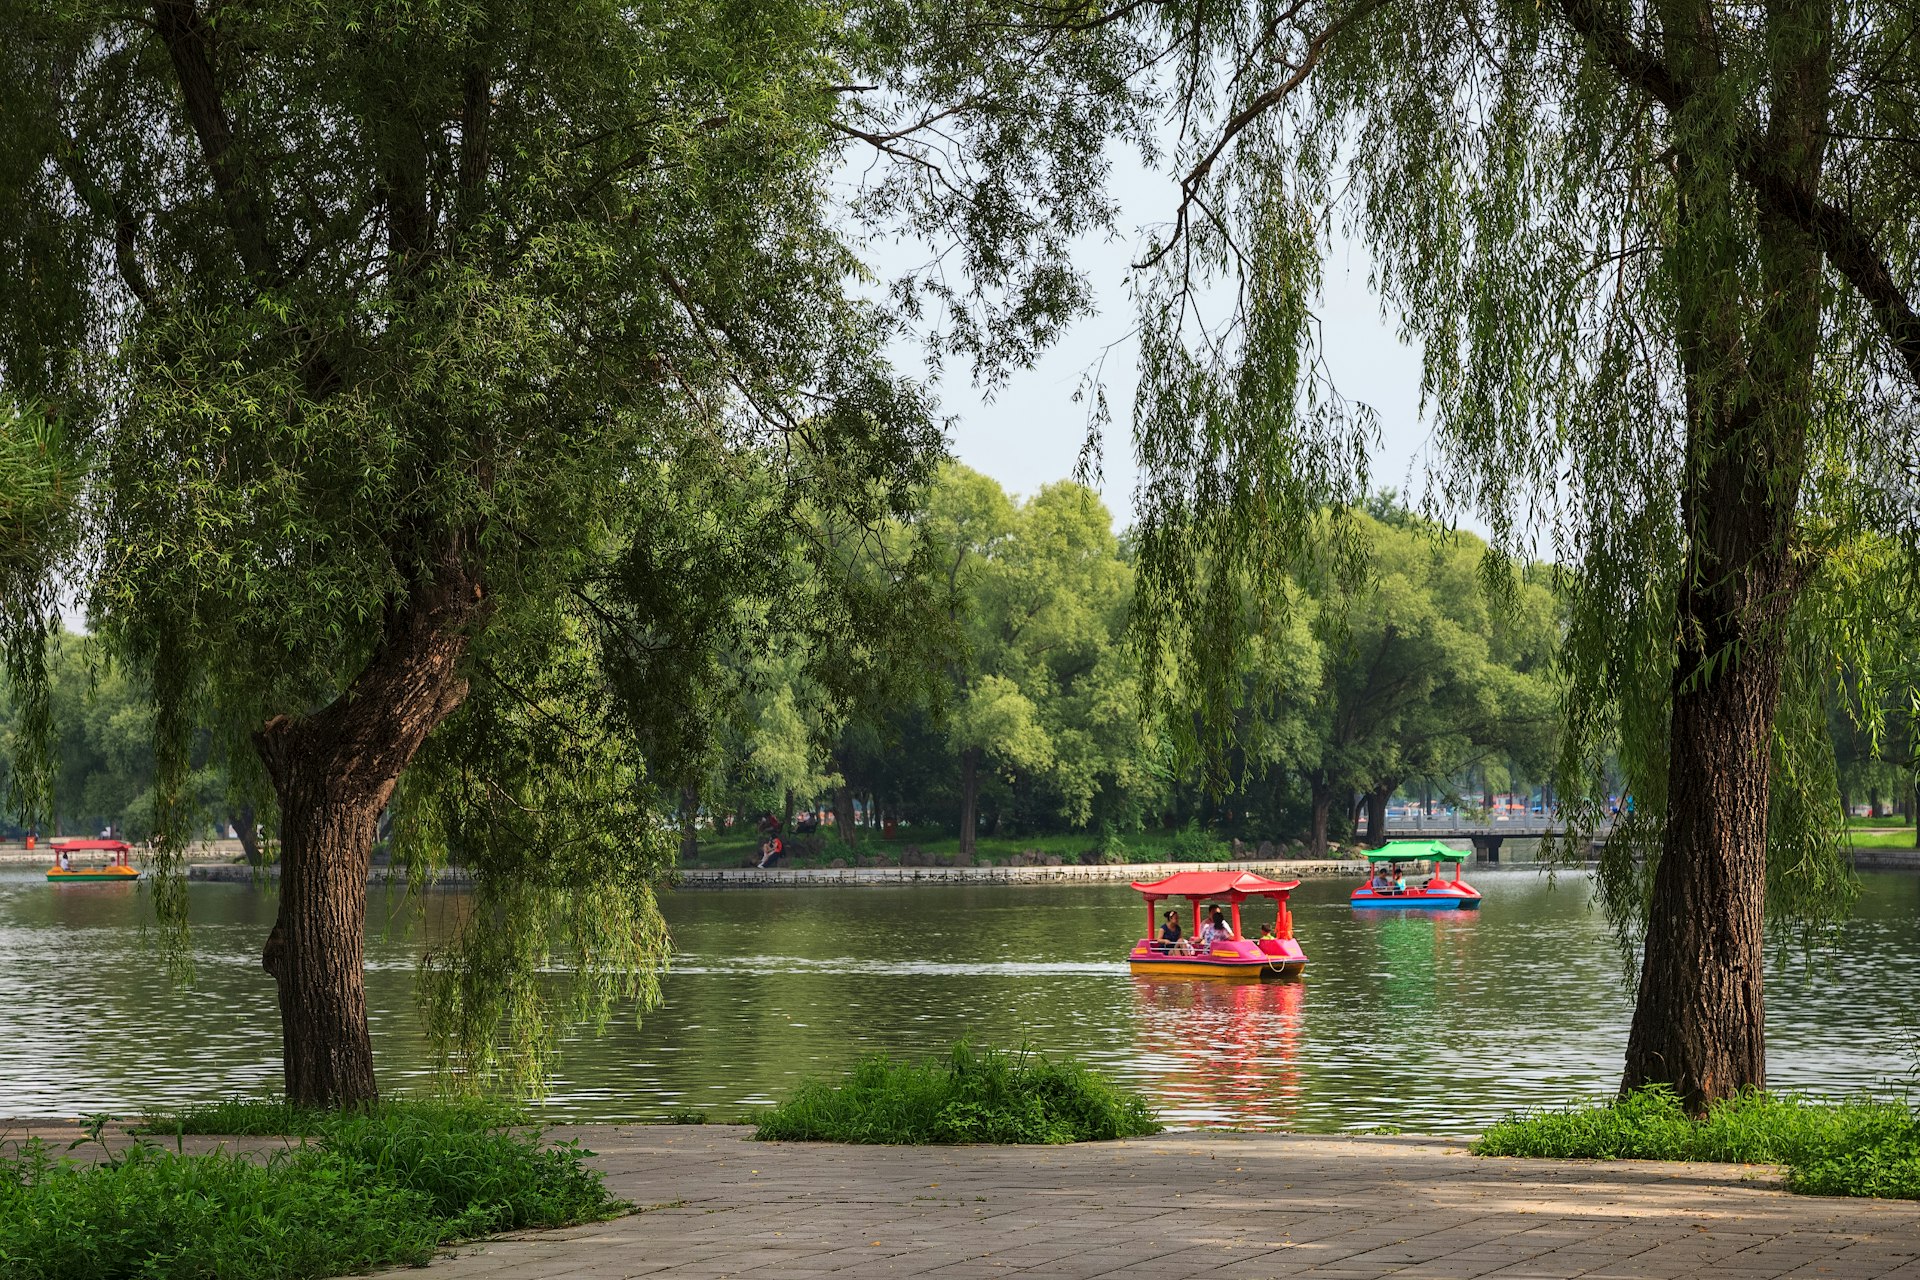 Features - People having a good time on a boats in Beiling Park, Shenyang, China